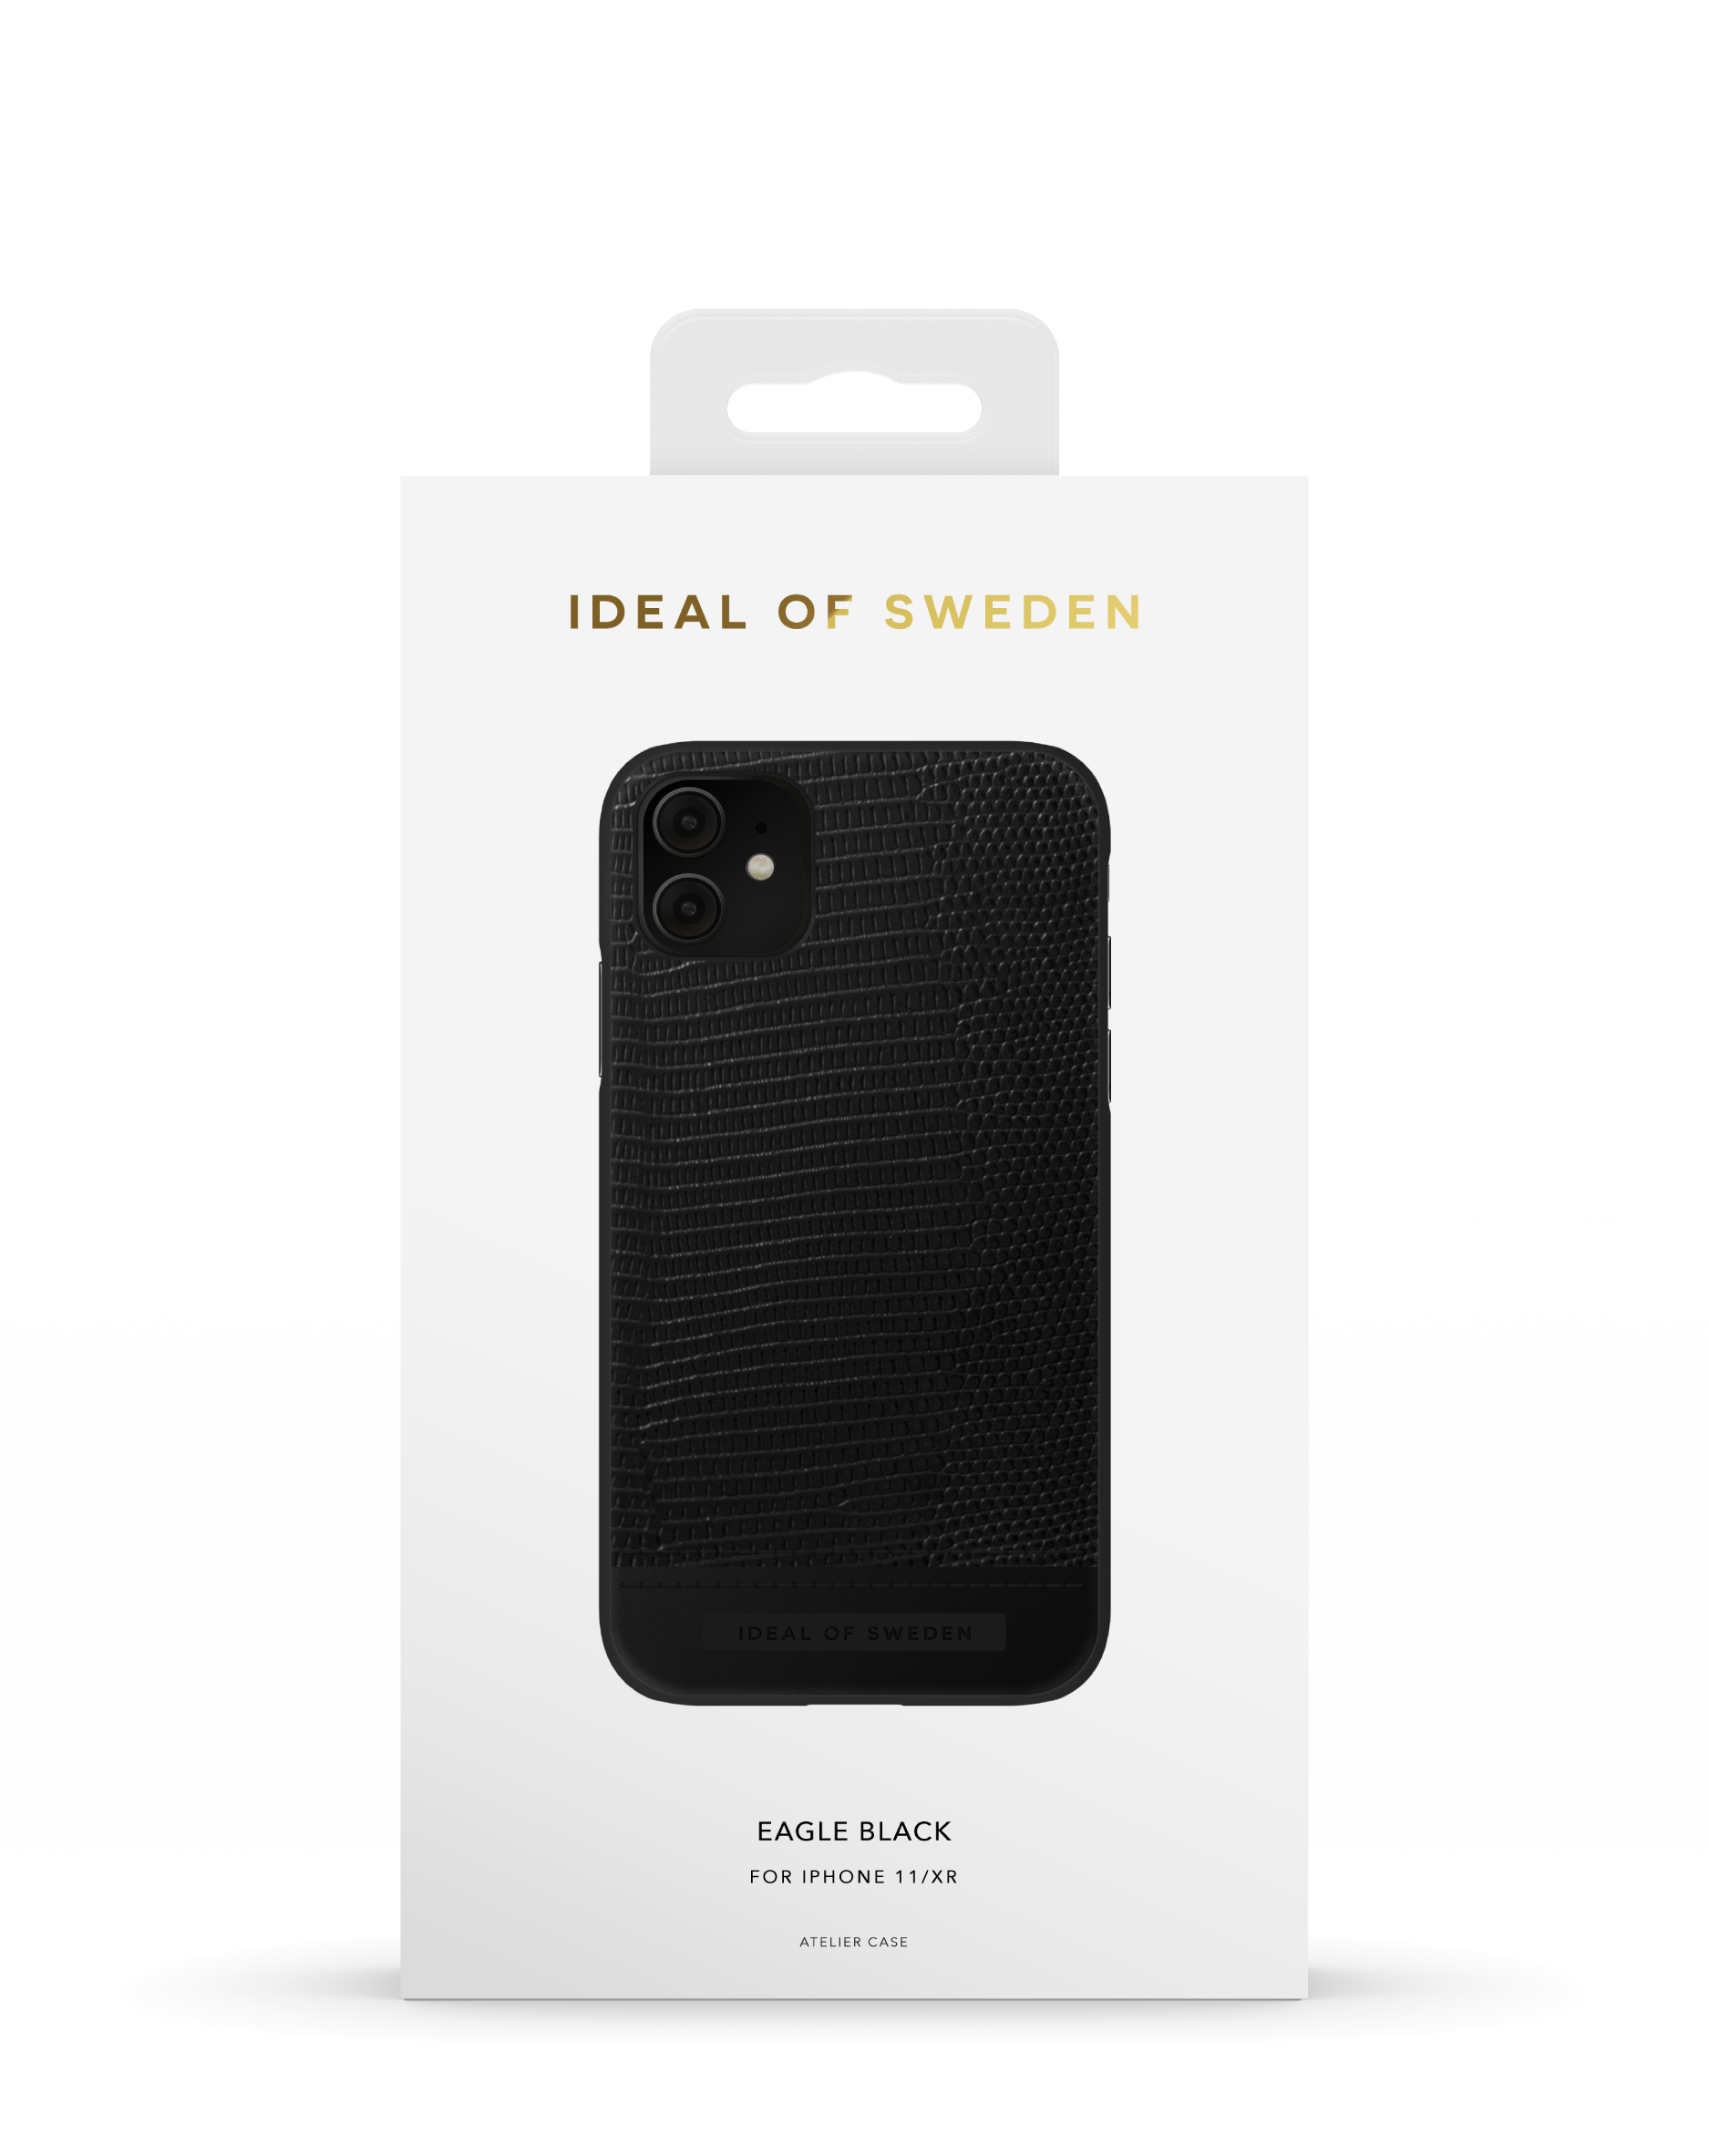 IDEAL OF SWEDEN XR, IDACAW20-1961-229, Black iPhone Apple, 11, Backcover, Eagle iPhone